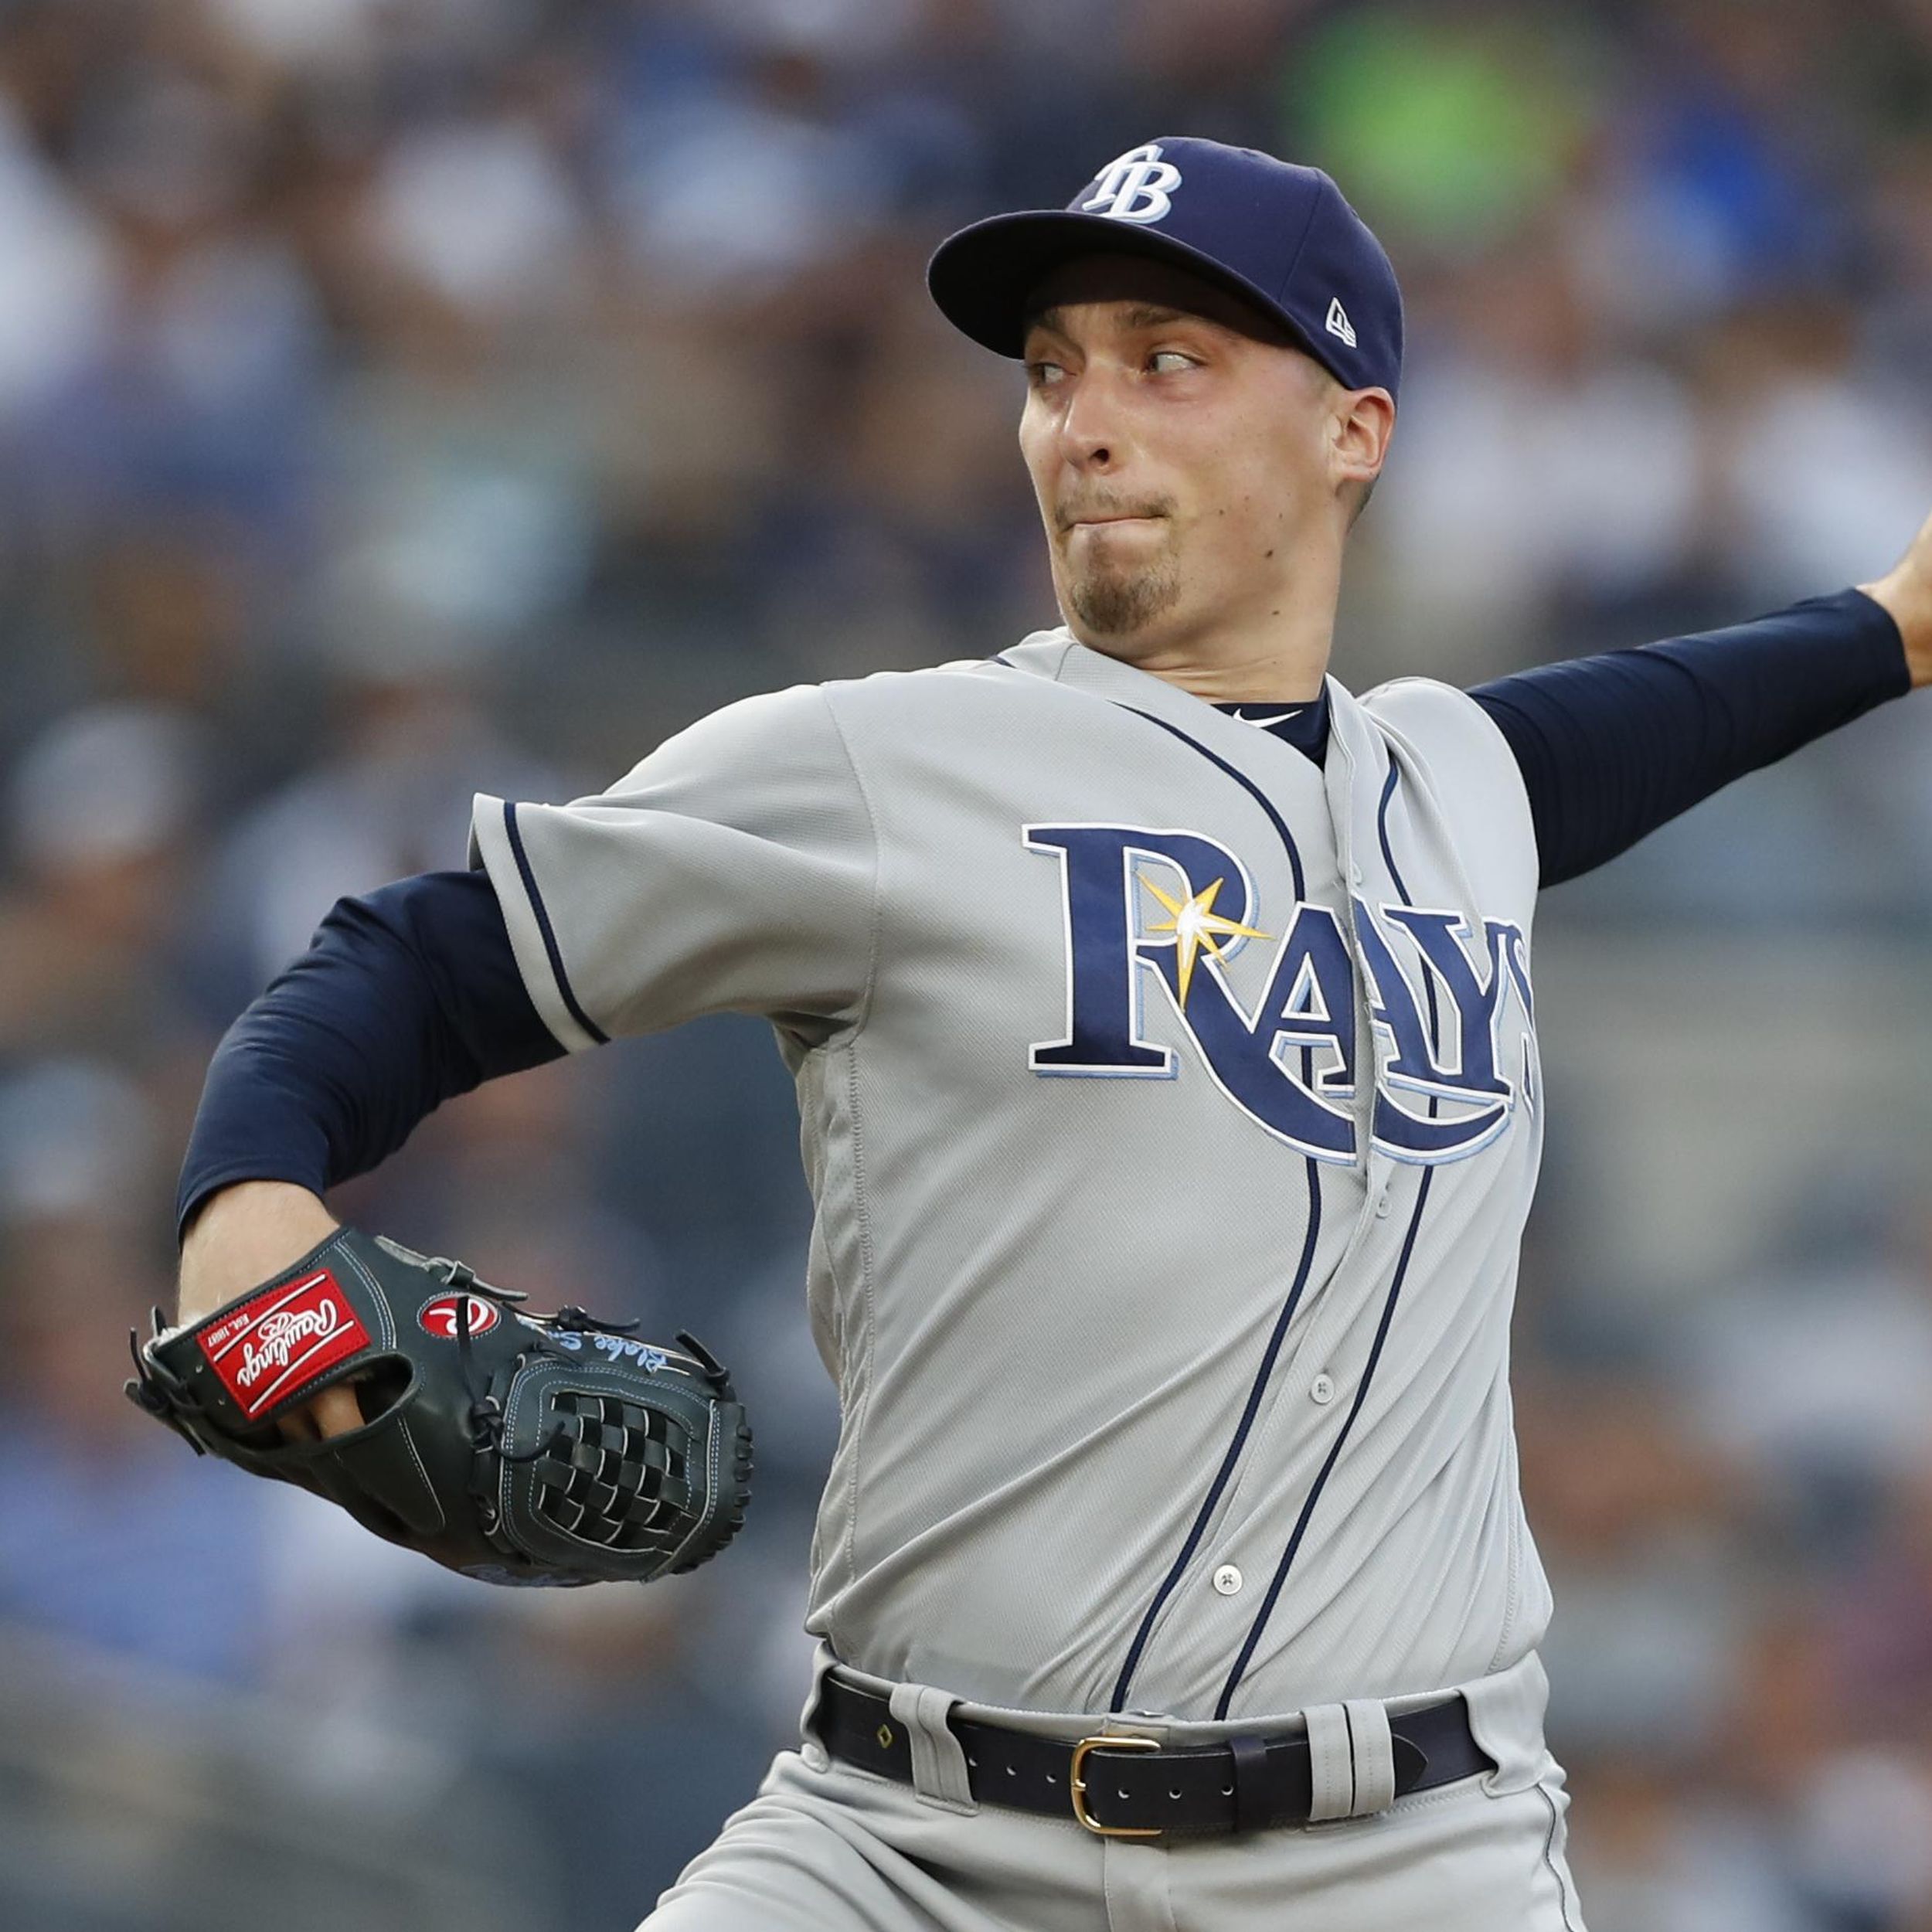 Rays pitcher Blake Snell to undergo elbow surgery, eyes September